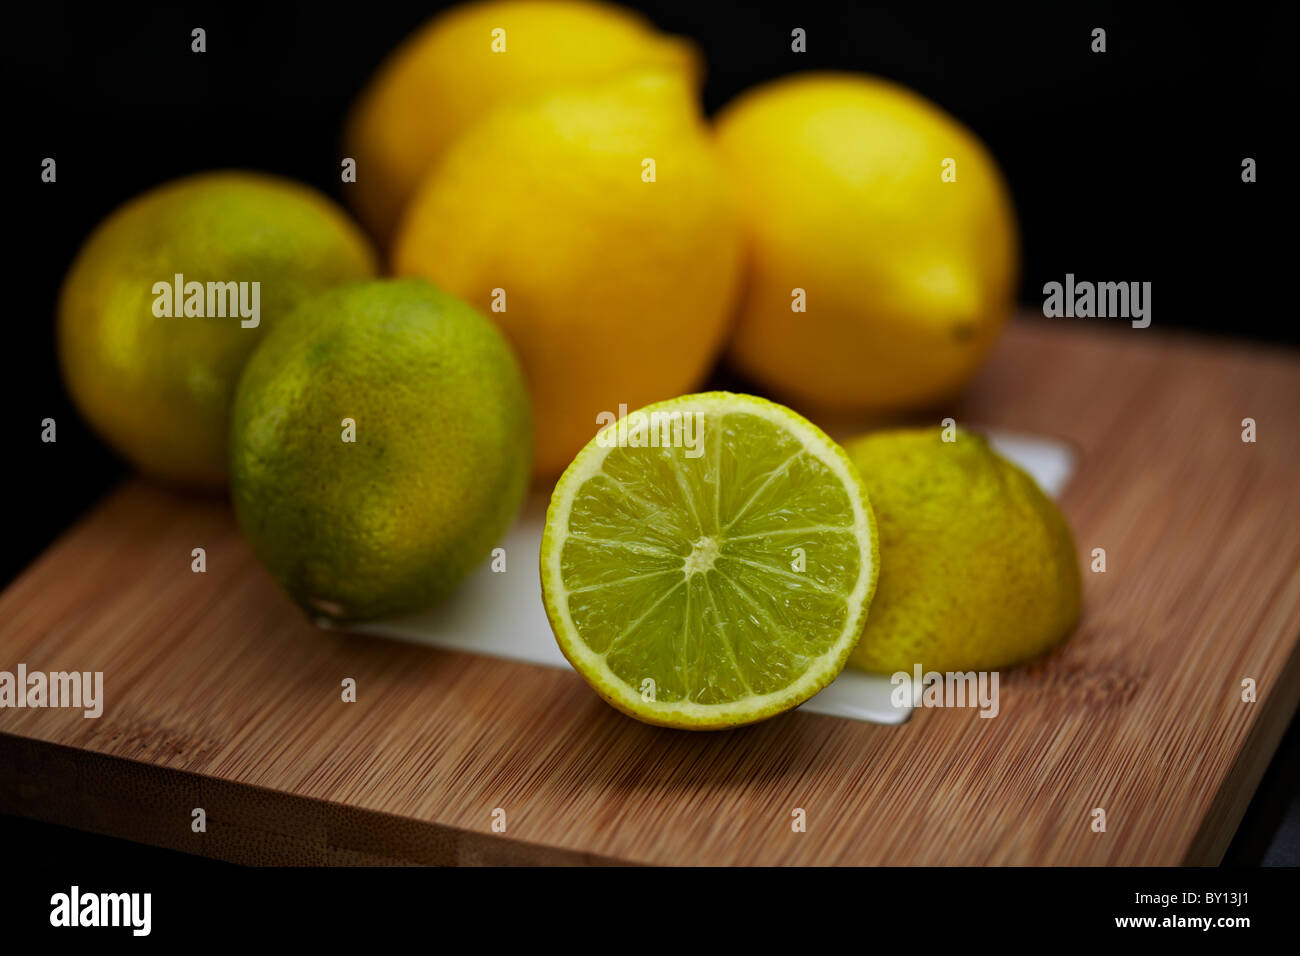 Citrus fruit (lemons and limes) on a bamboo wooden chopping board Stock Photo